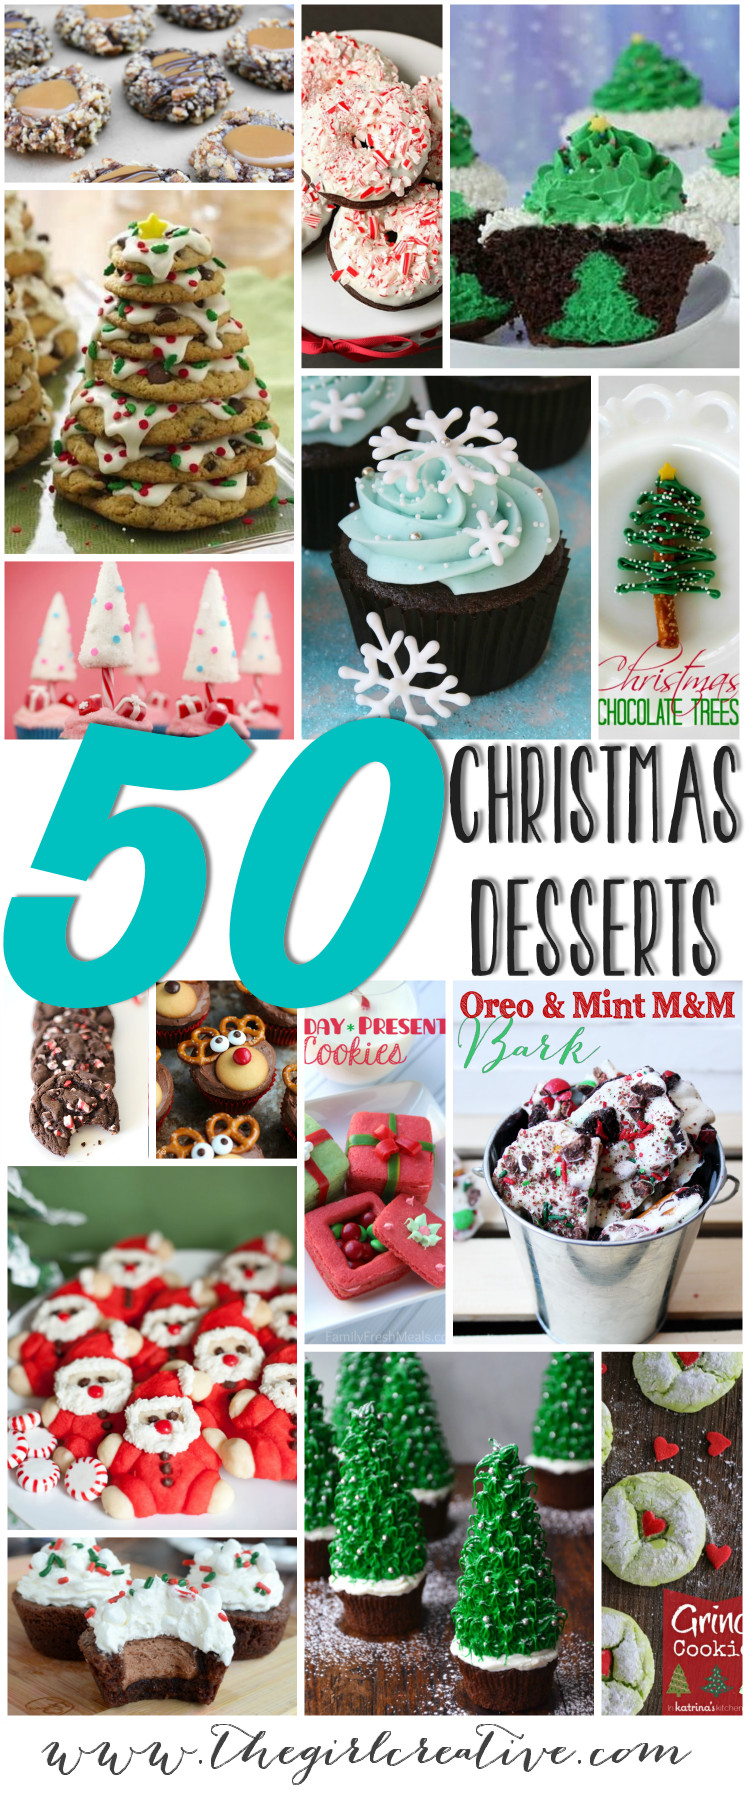 Creative Christmas Desserts
 50 Christmas Desserts Page 4 of 4 The Girl Creative